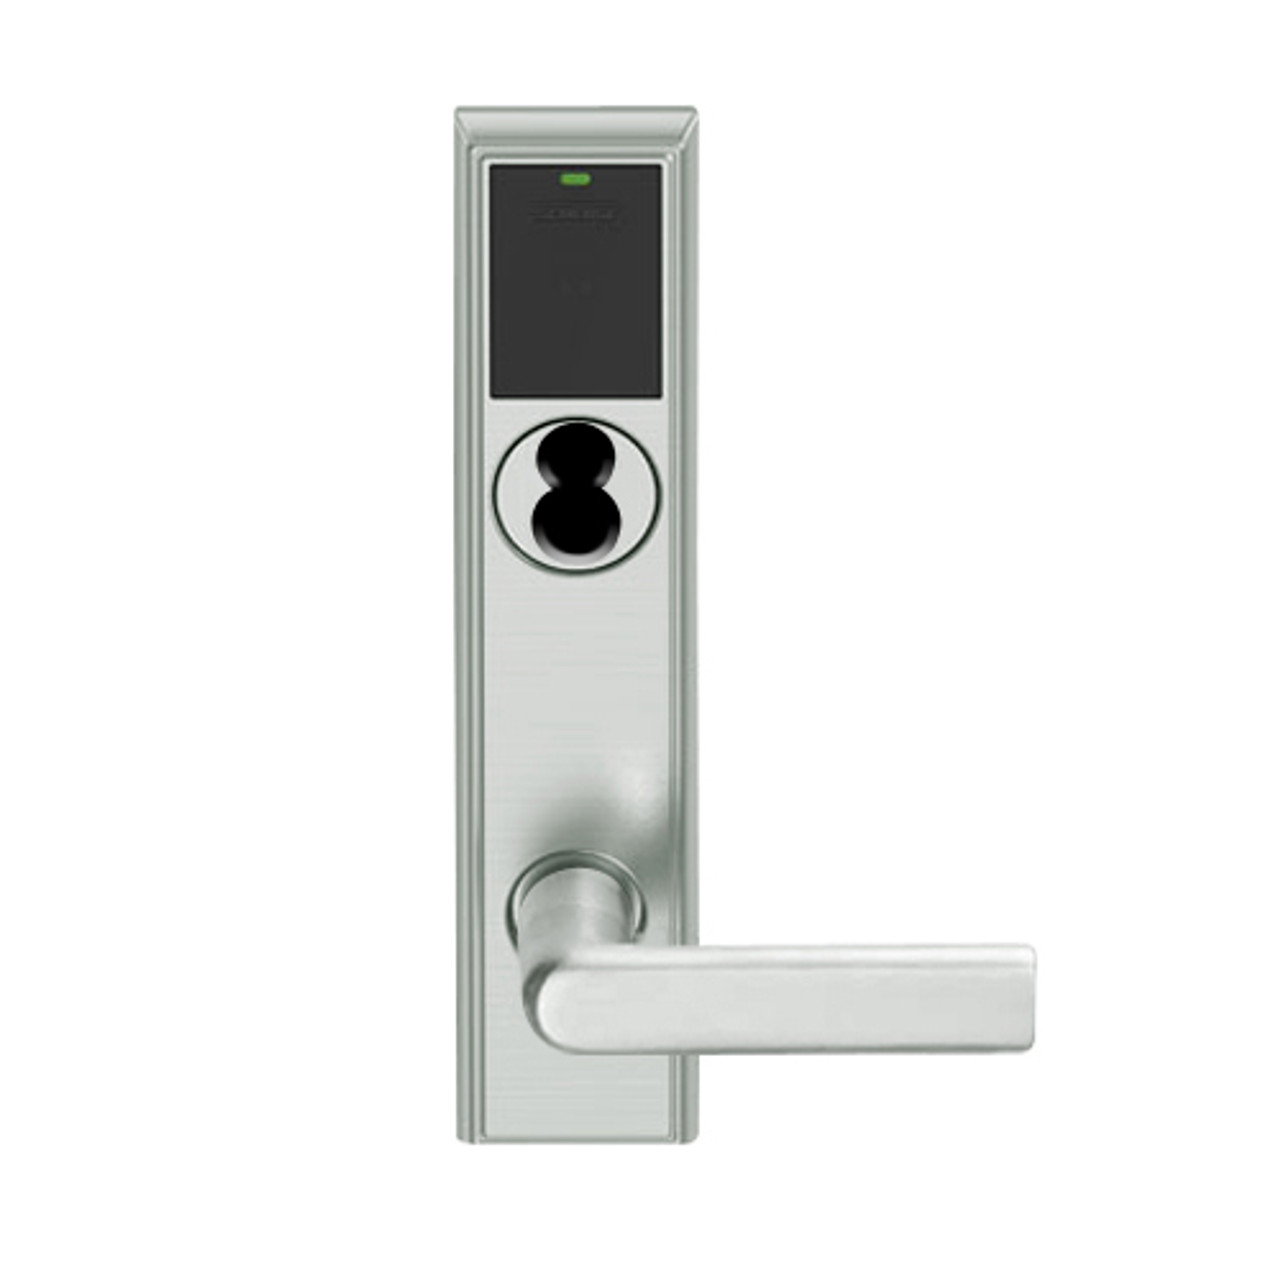 LEMD-ADD-J-01-619 Schlage Privacy/Apartment Wireless Addison Mortise Deadbolt Lock with LED and 01 Lever Prepped for FSIC in Satin Nickel